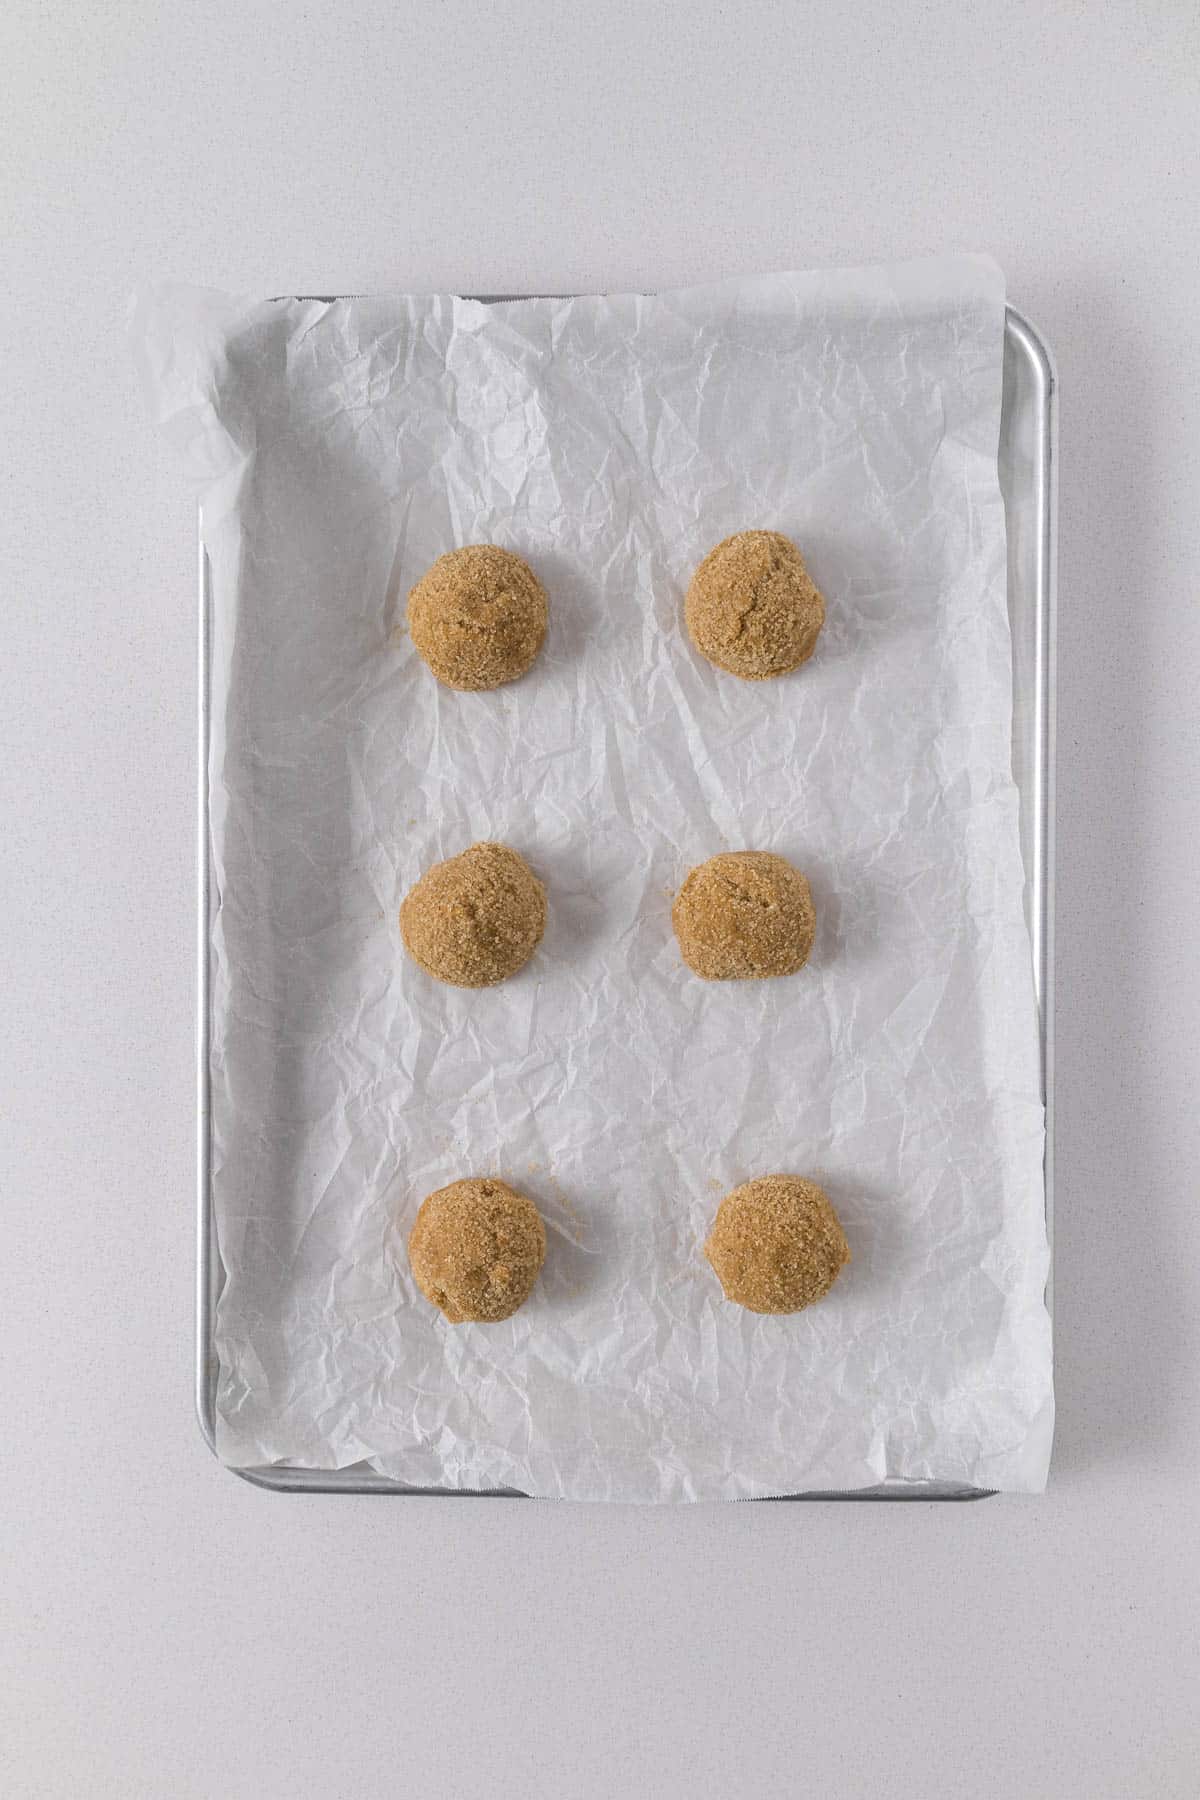 Step 6 - Portioned ginger cookies rolled in ginger-sugar.